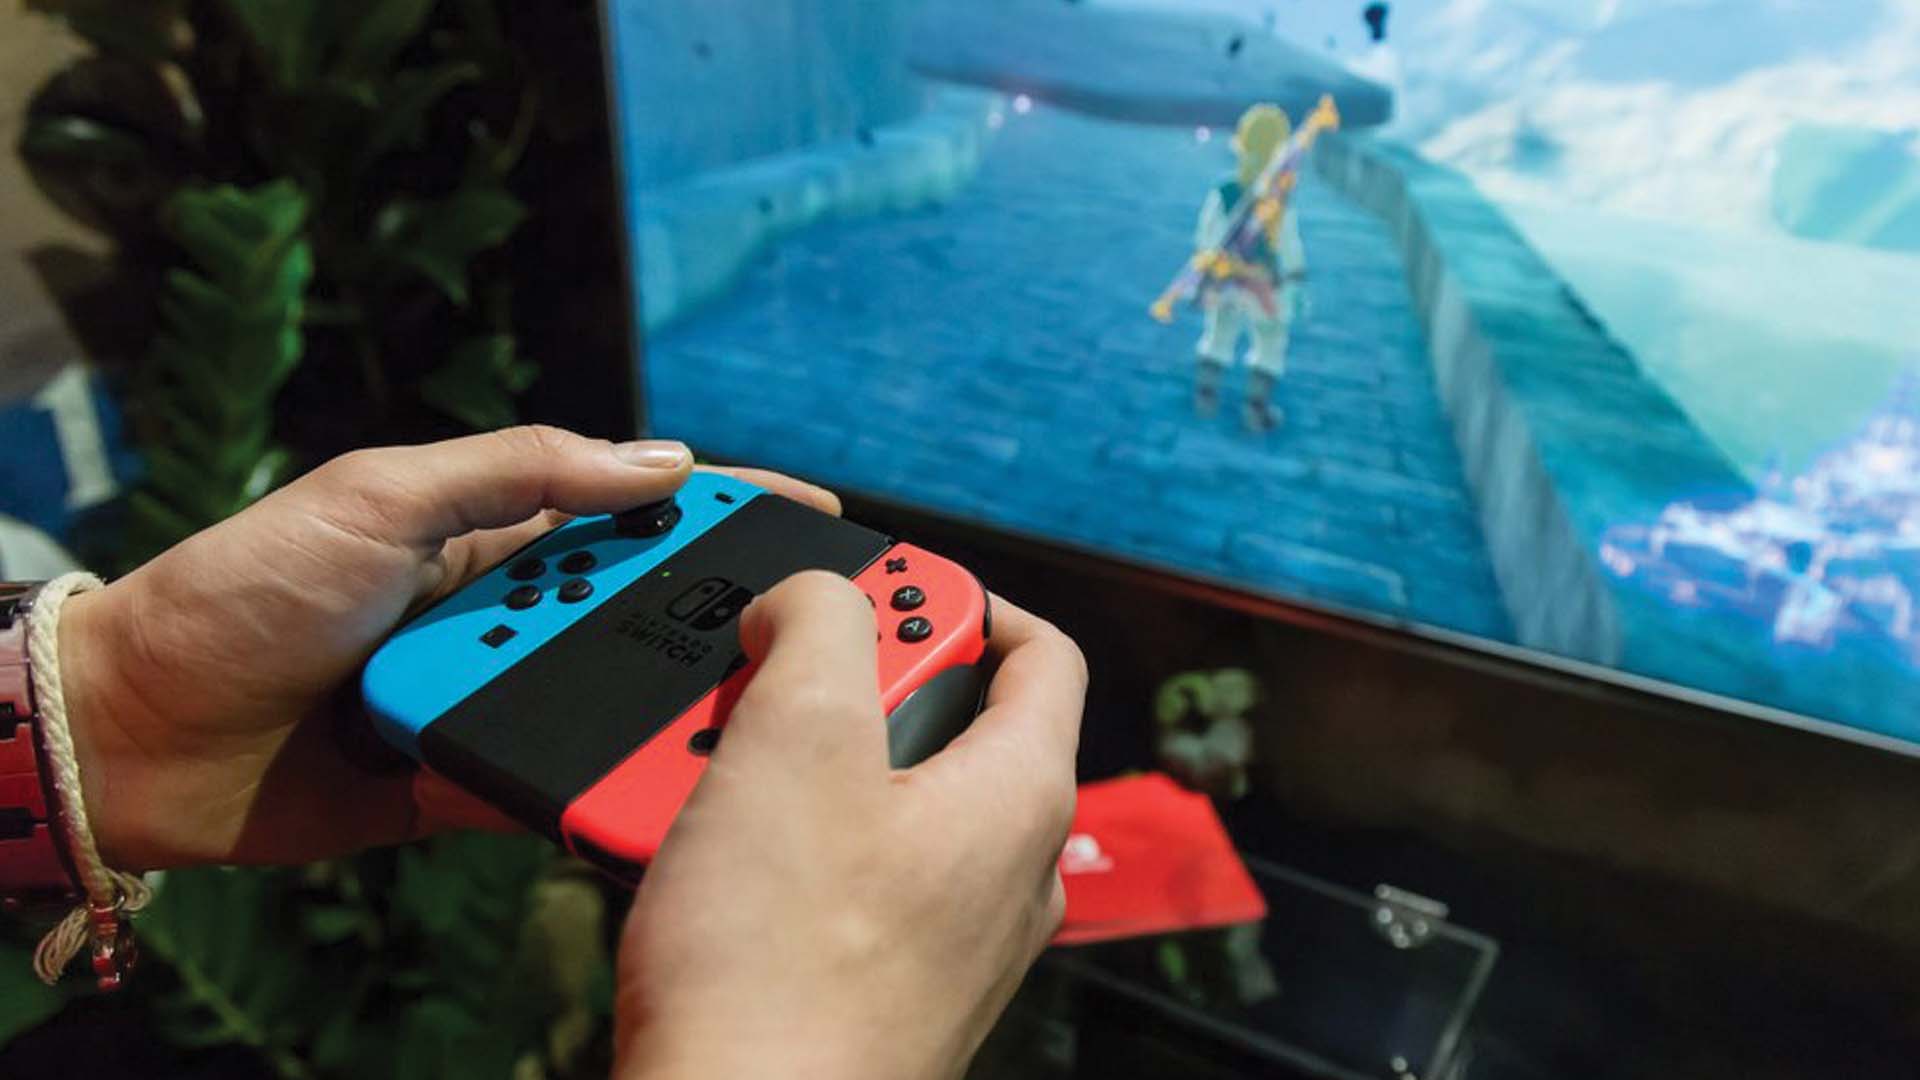 Nintendo switch being played